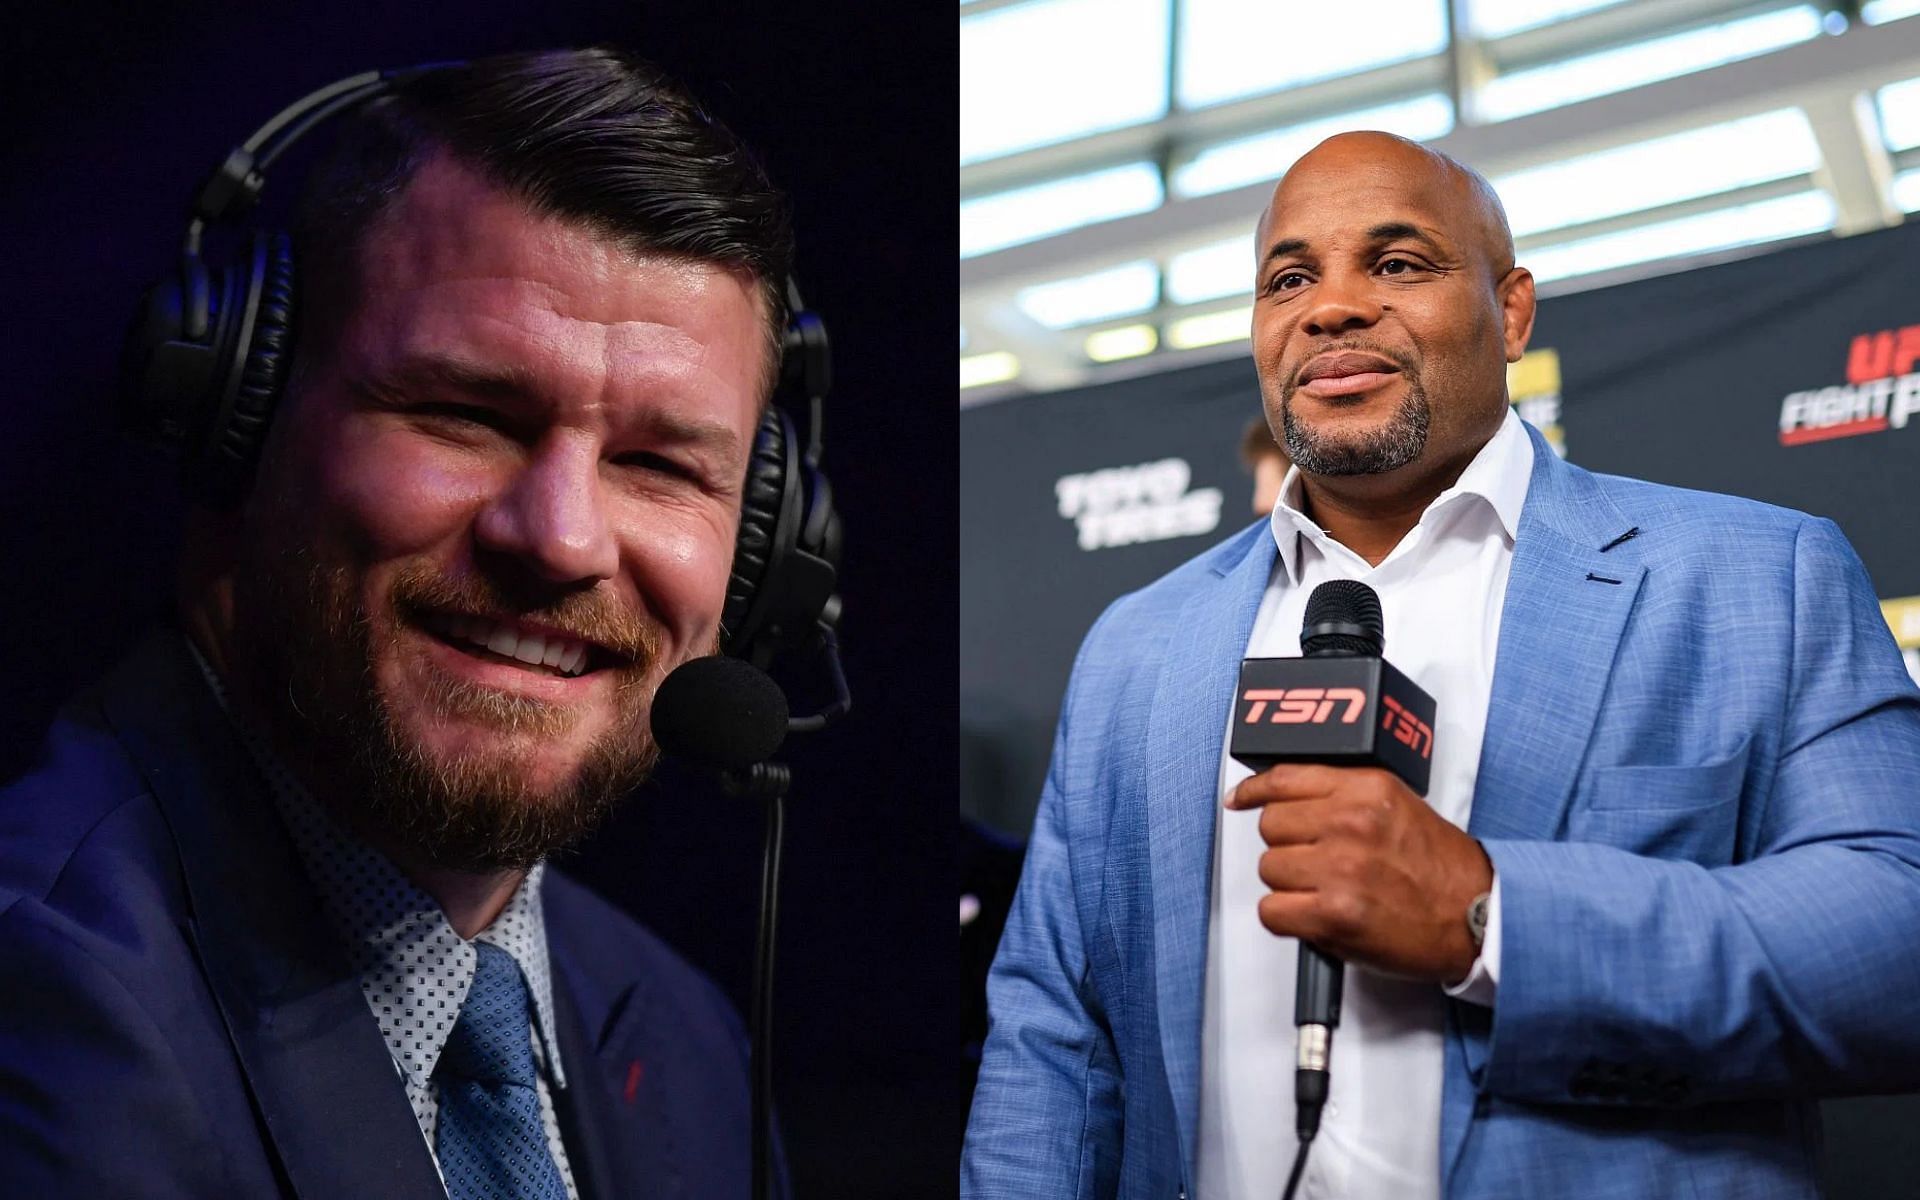 Michael Bisping (L) and Daniel Cormier (R)